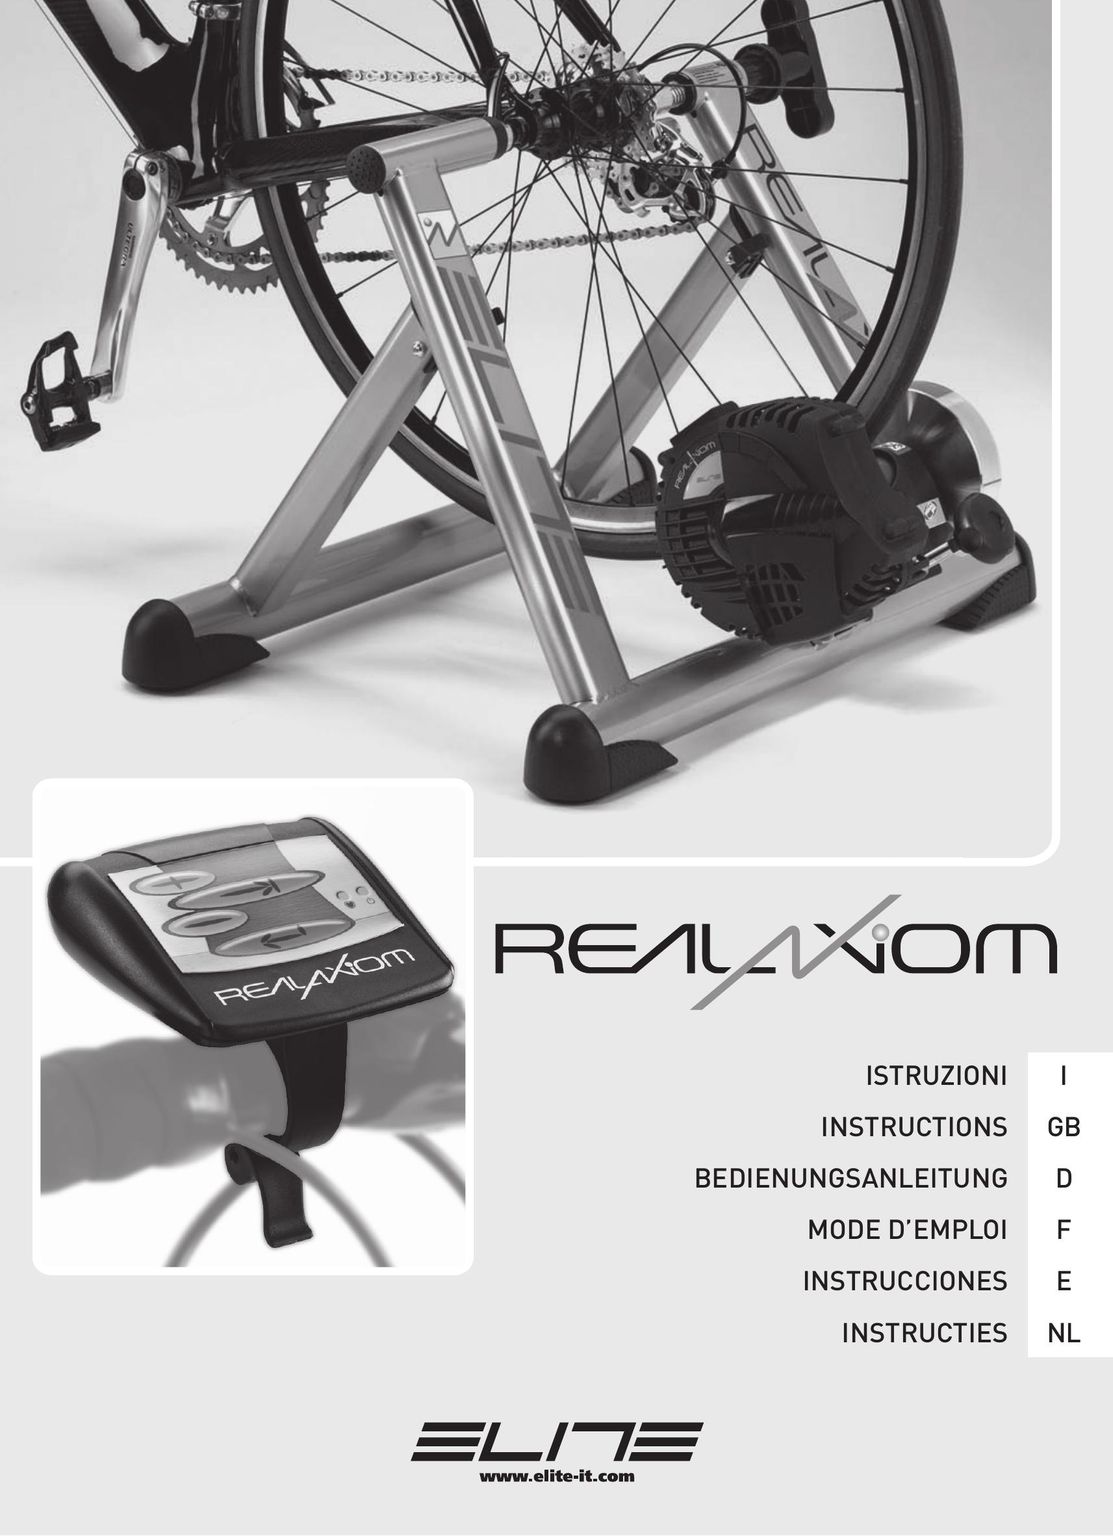 Elite Real AXIOM Exercise Bike User Manual (Page 1)